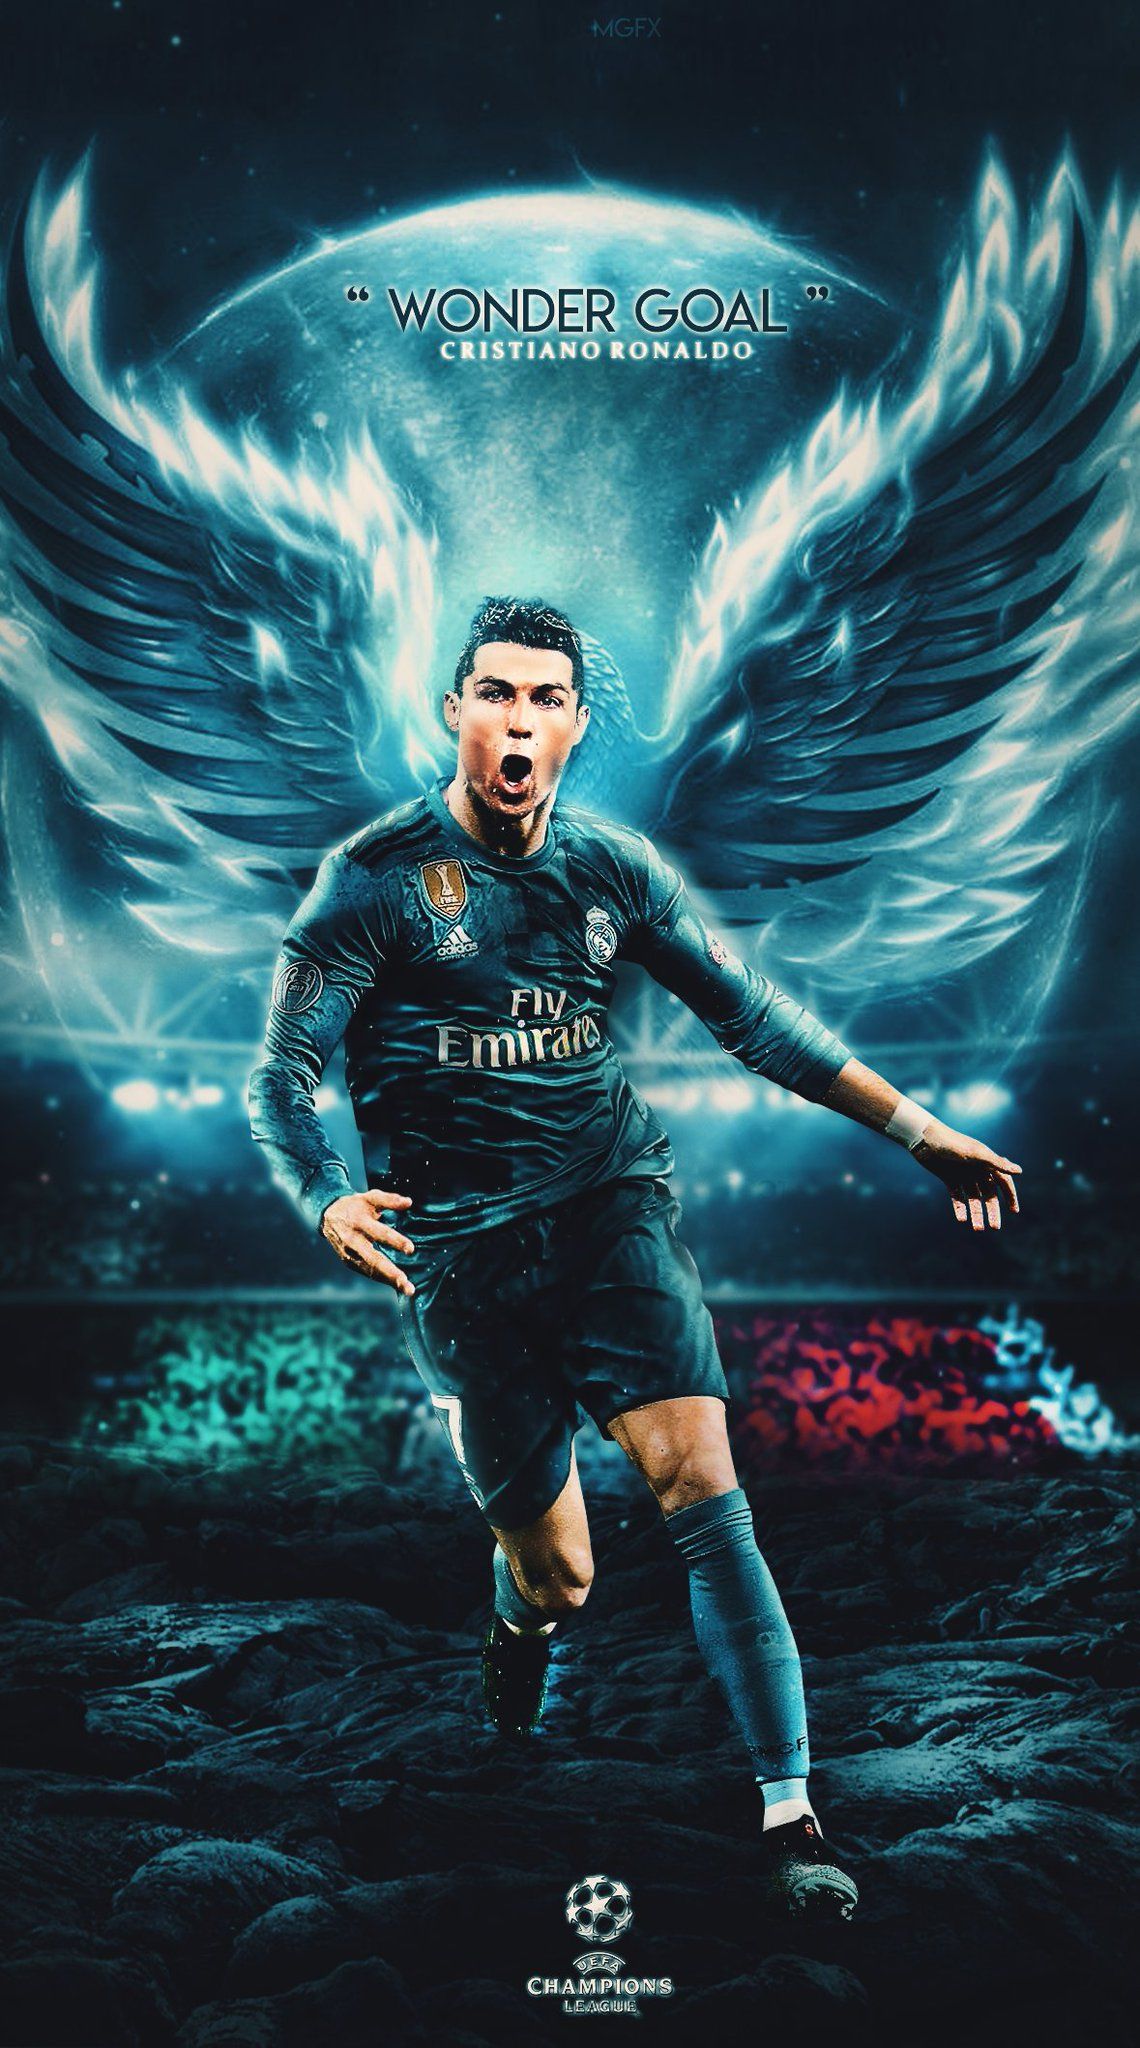 Mohammedgfx. The best in the world wins the goal of the season